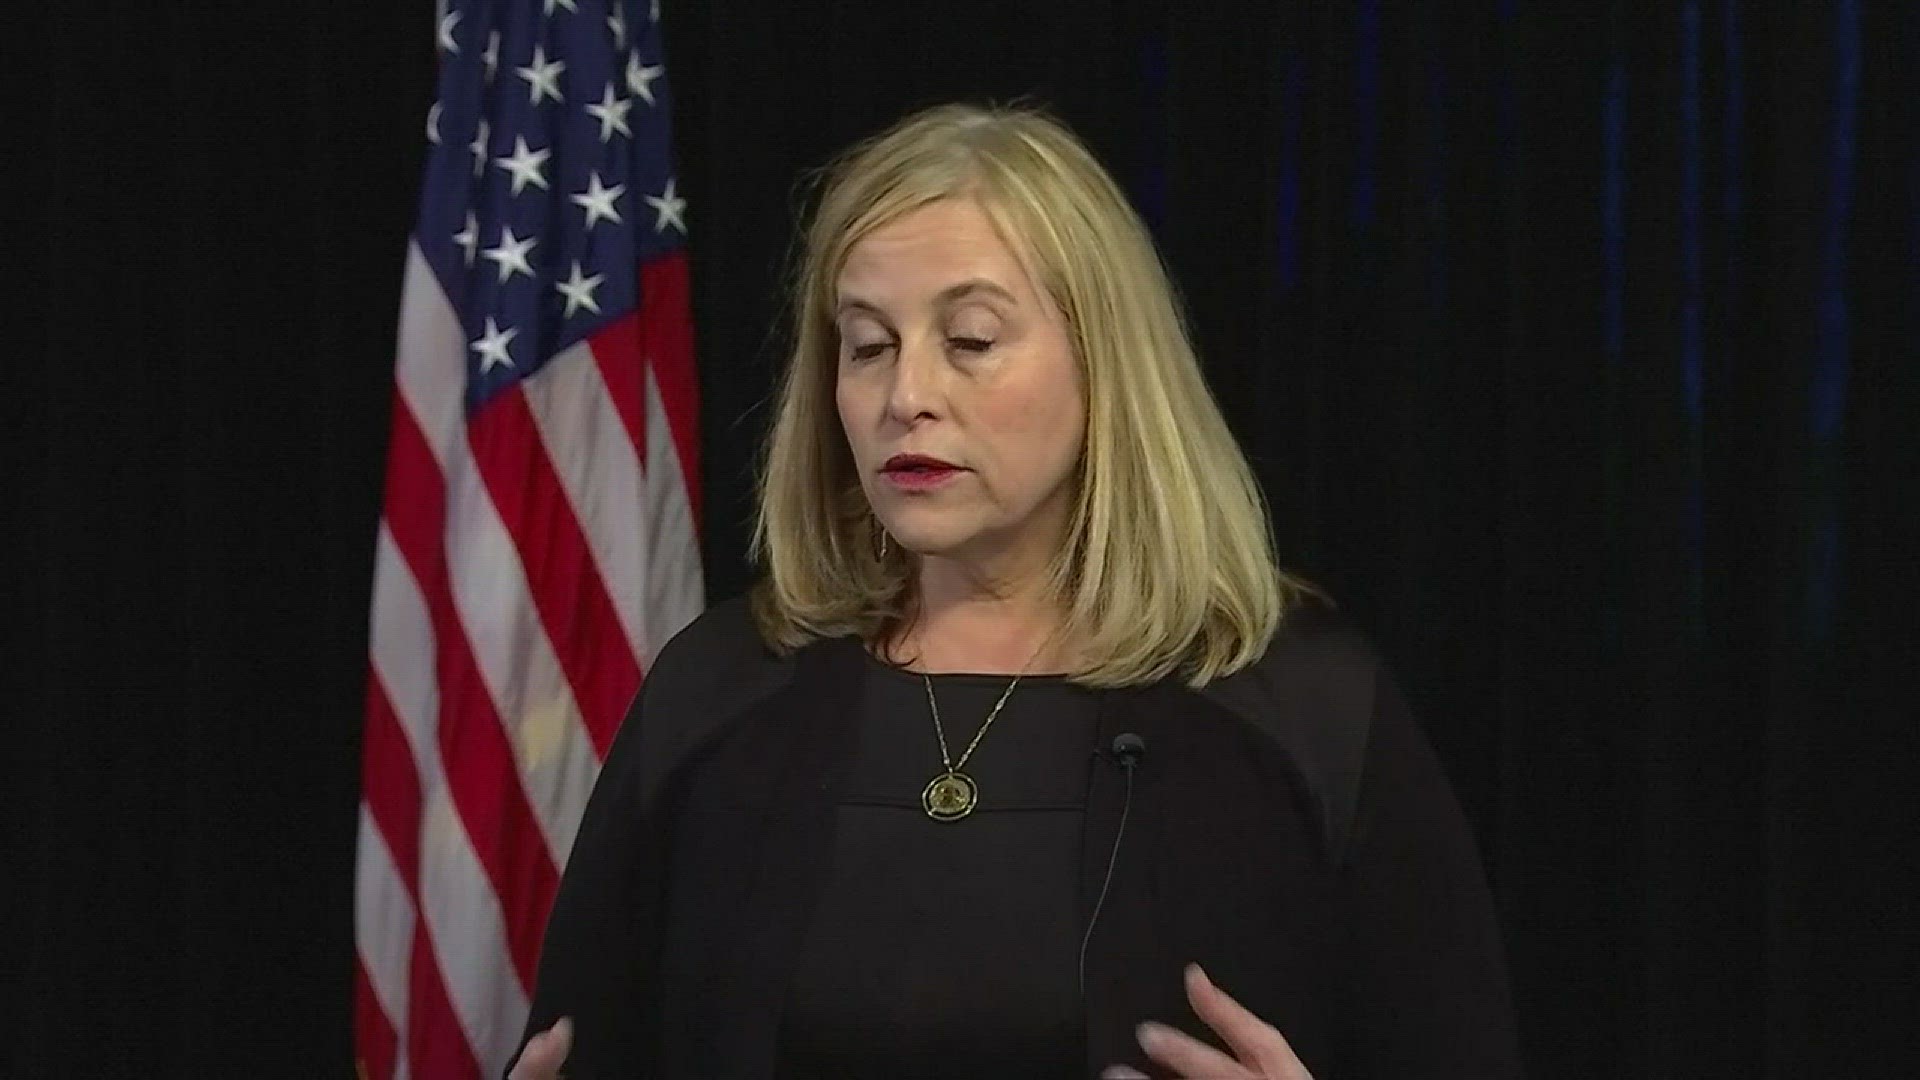 Nashville Mayor Megan Barry holds a press conference after admitting to an extramarital affair with her top police security officer. Jan. 31, 2018. NBC video.